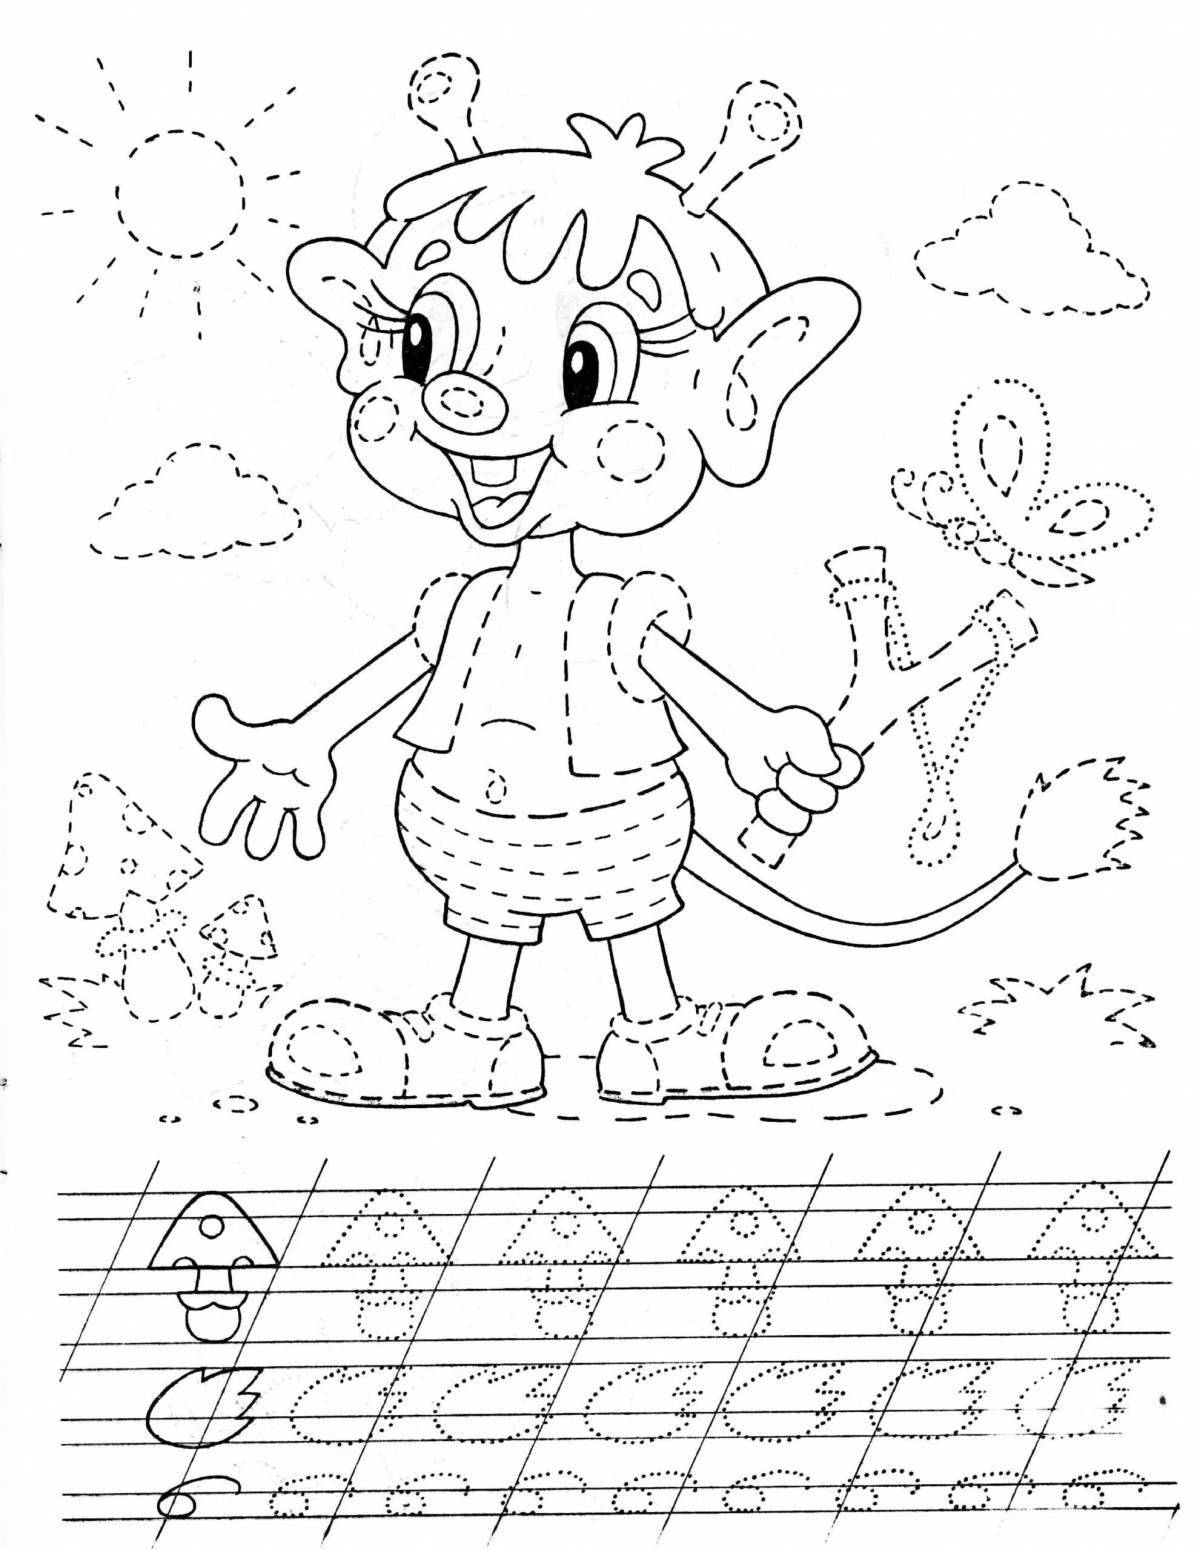 Charming coloring book for girls educational